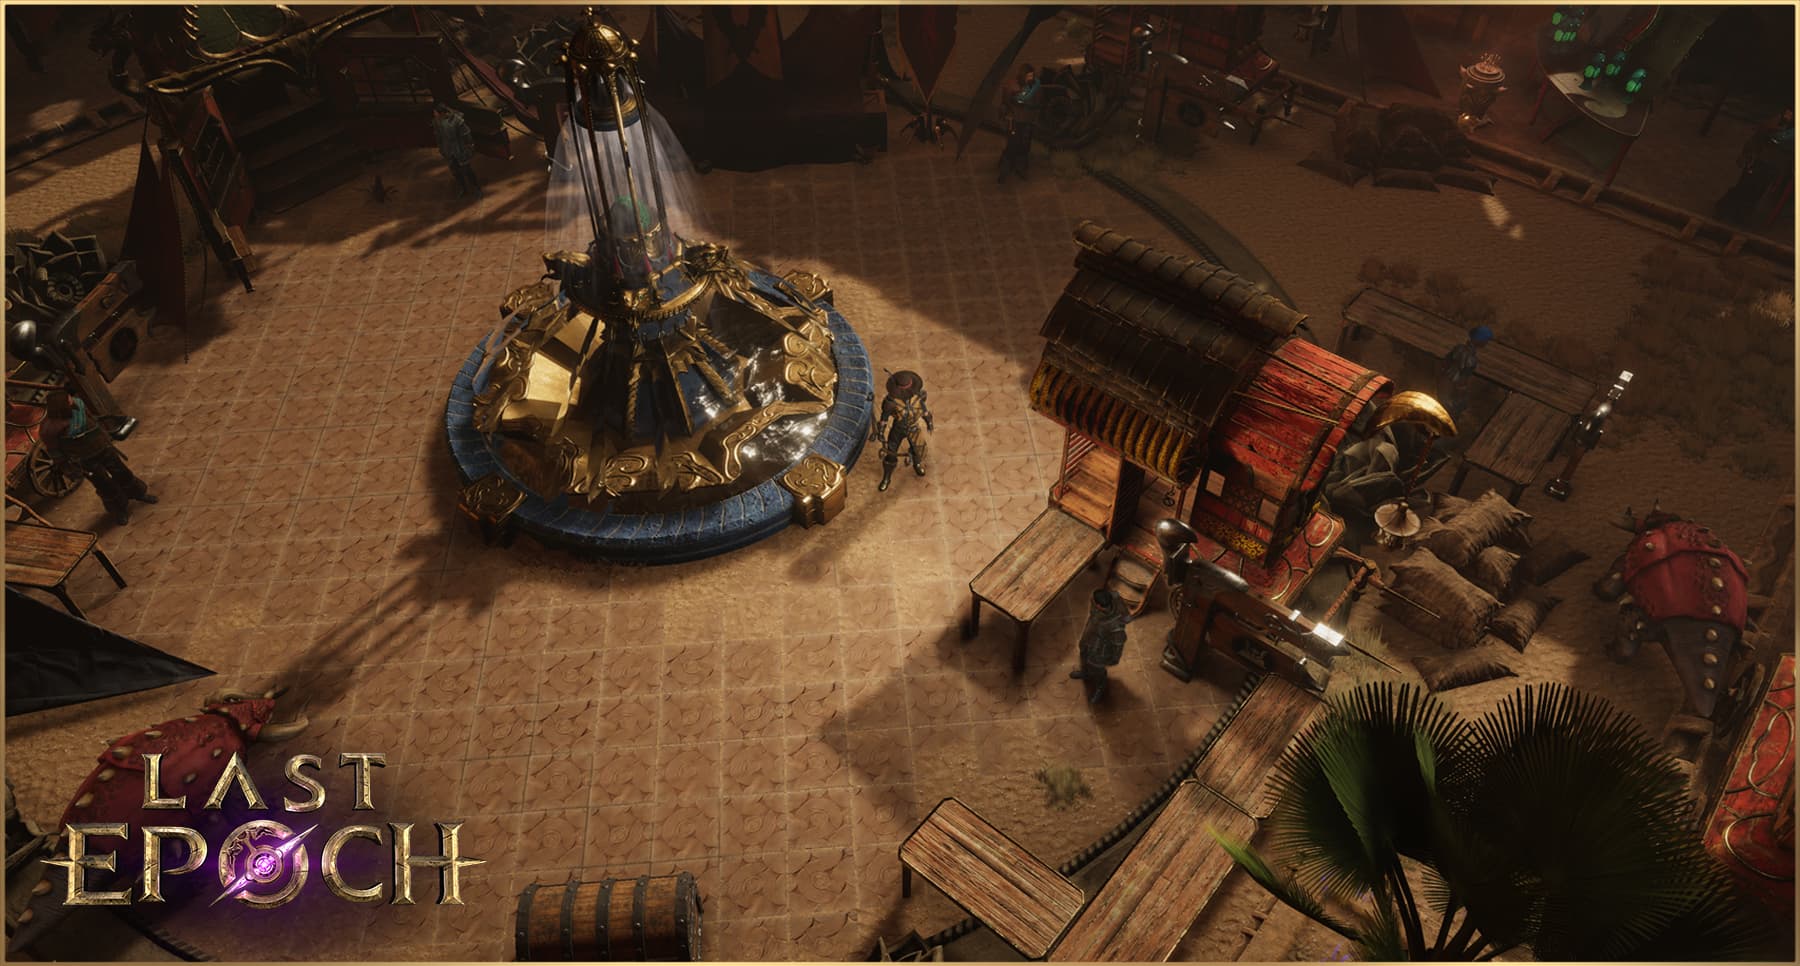 A promotional image of Merchant's Guild Bazaar from The Last Epoch.